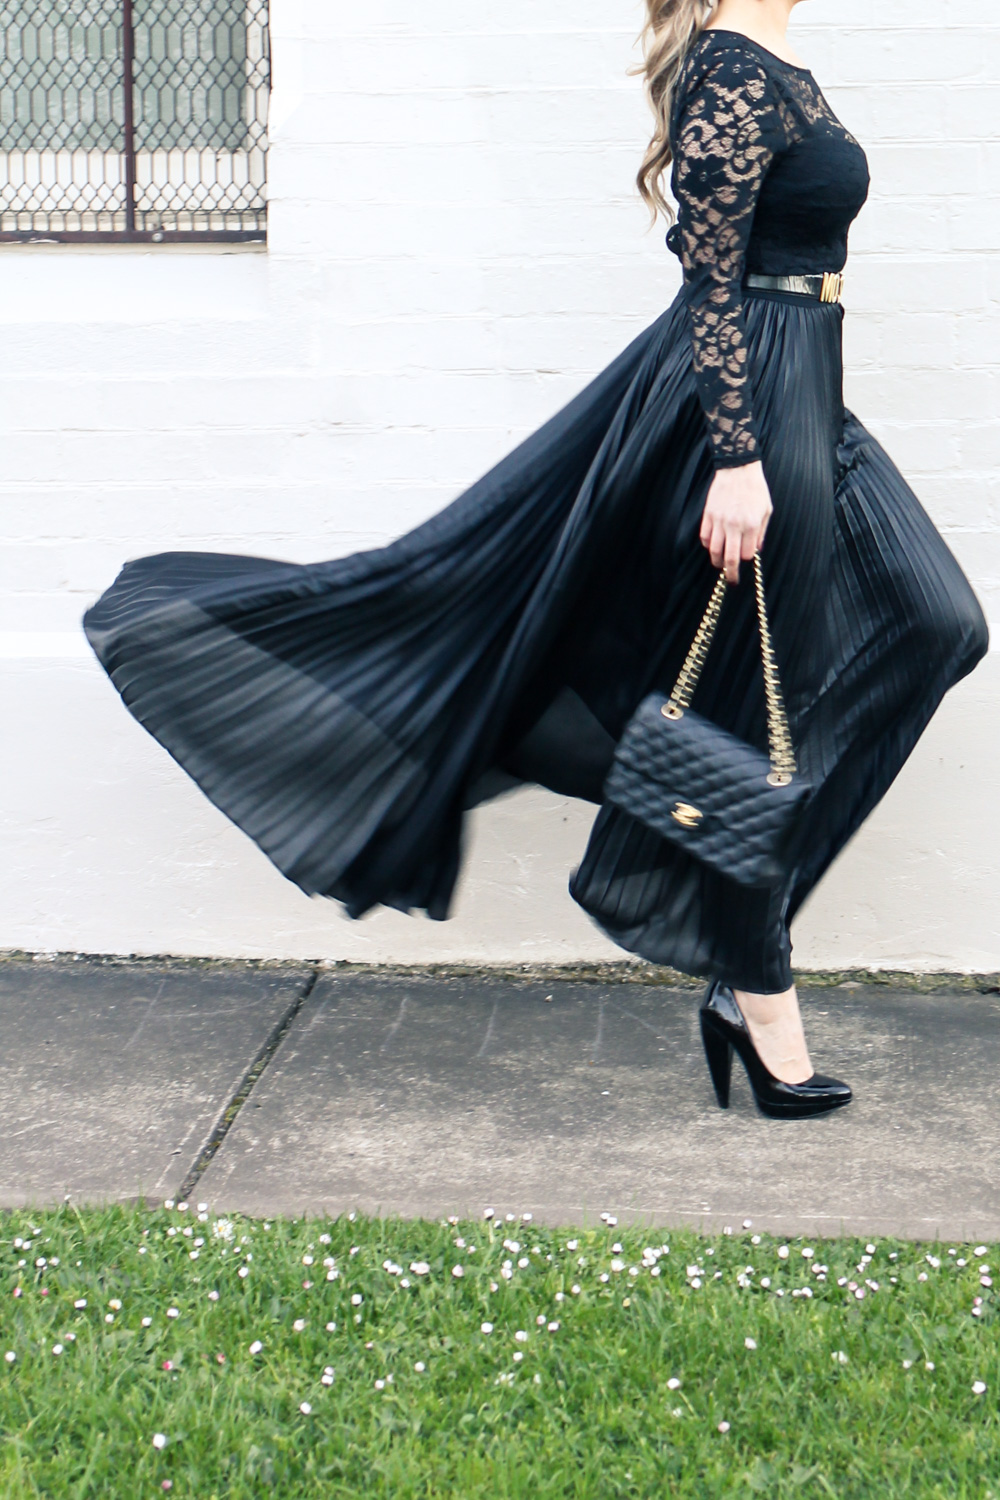 Goldfields Girl styling all black pleated maxi skirt, Moschino belt and Chanel bag